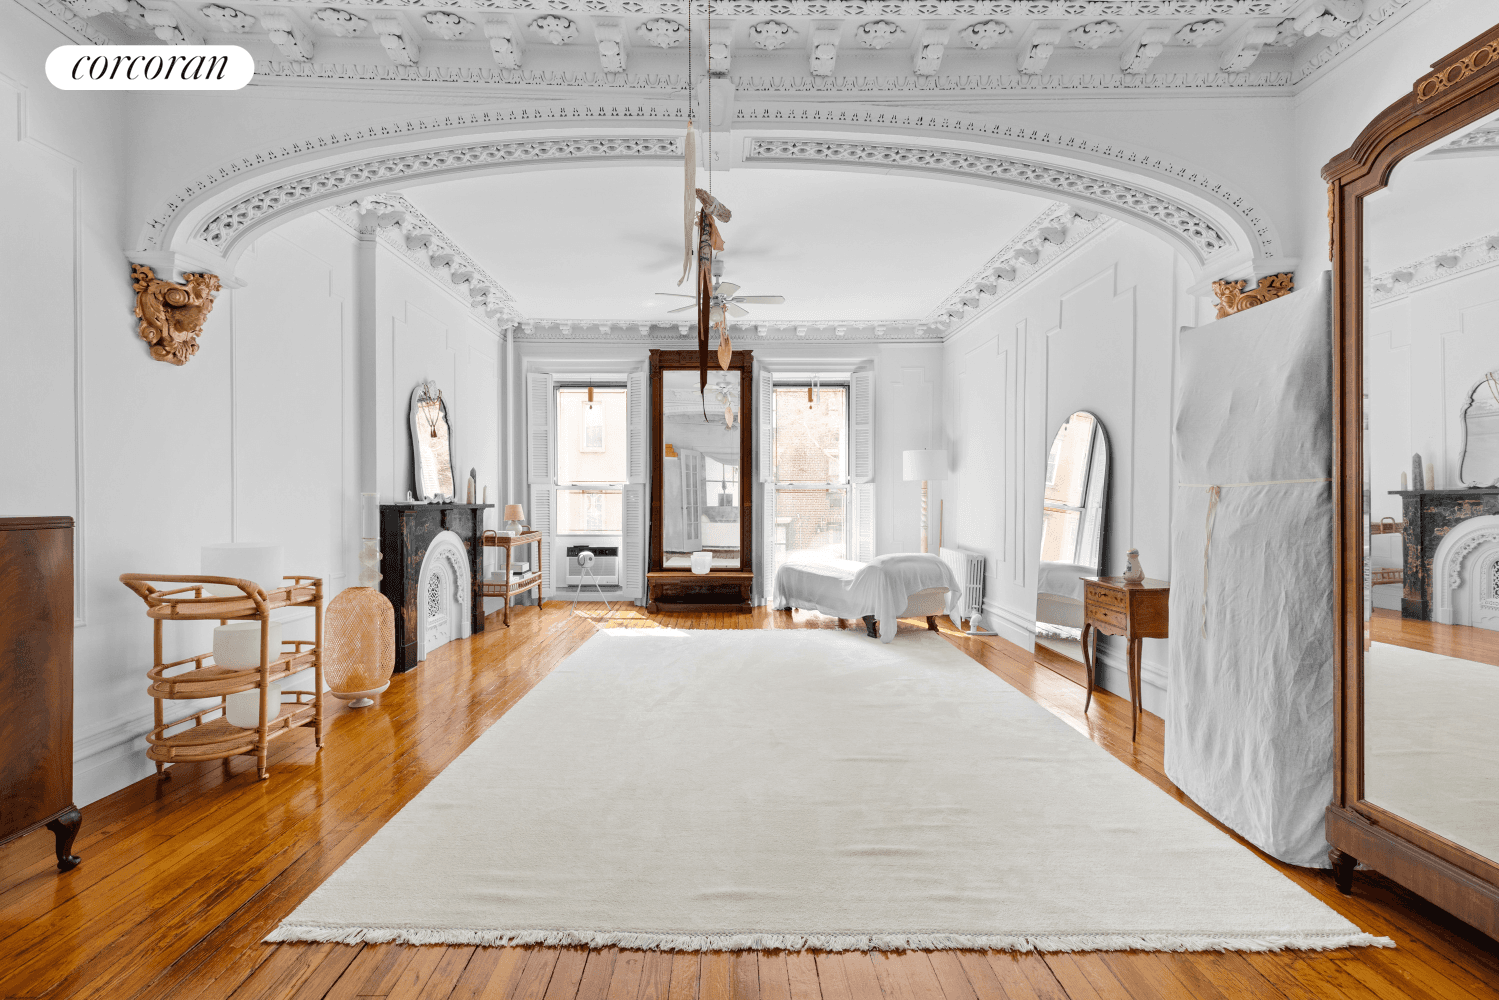 Welcome to a One of One opportunity to own a 25 foot wide, unique, four family, landmarked prewar townhouse on one of the most beautiful blocks in all of Chelsea.